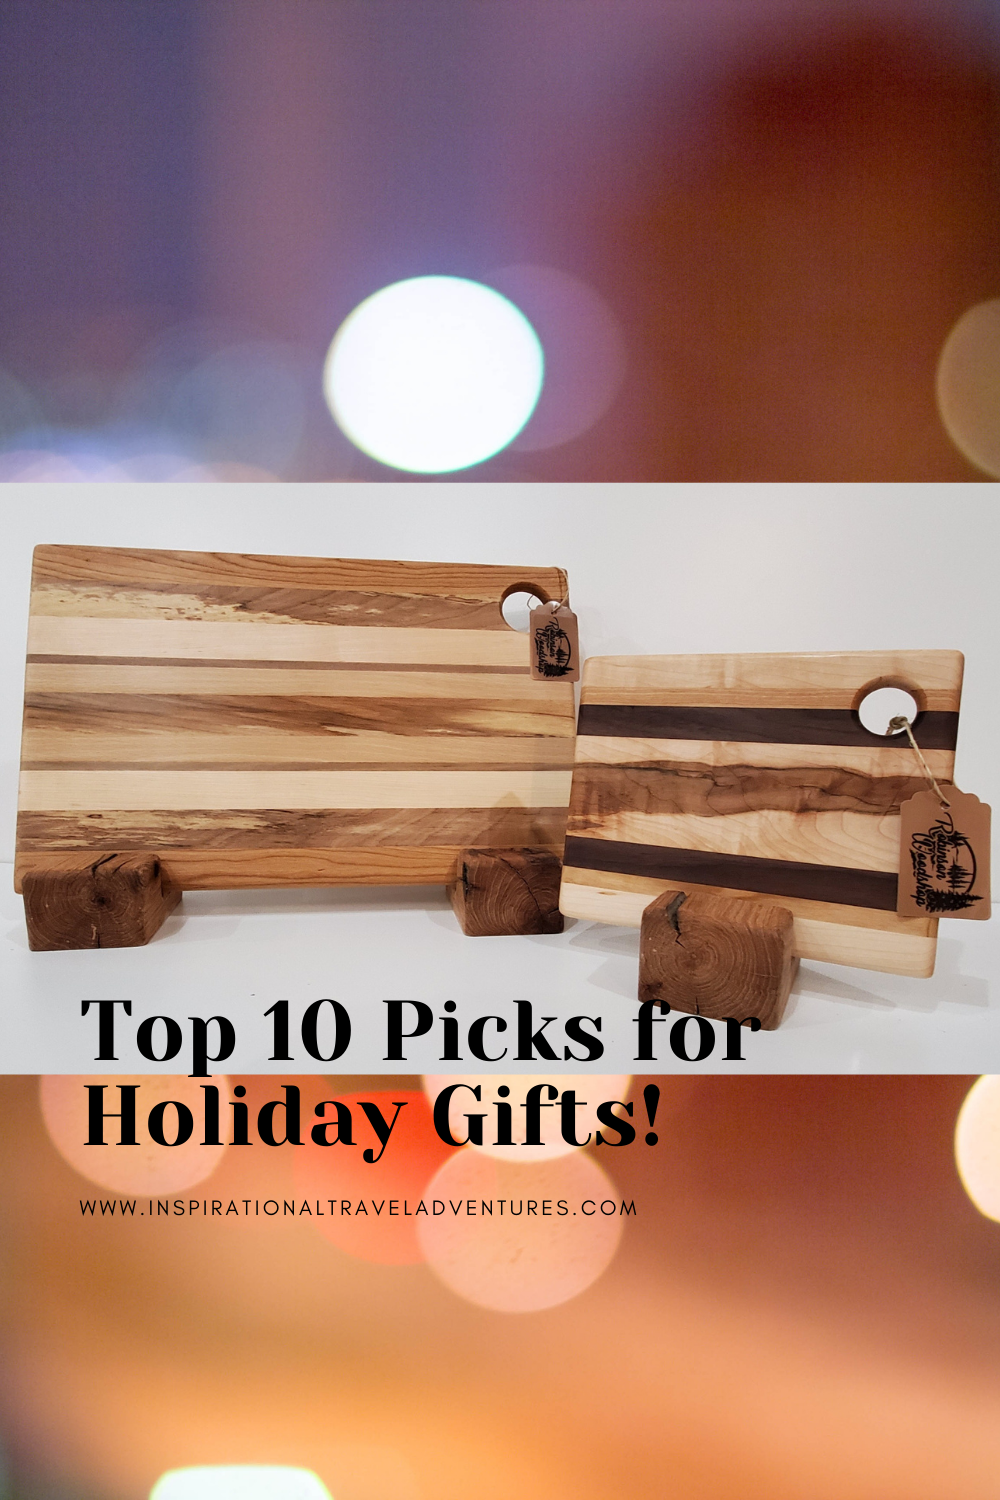 TOP 10 PICKS FOR HOLIDAY GIFTS